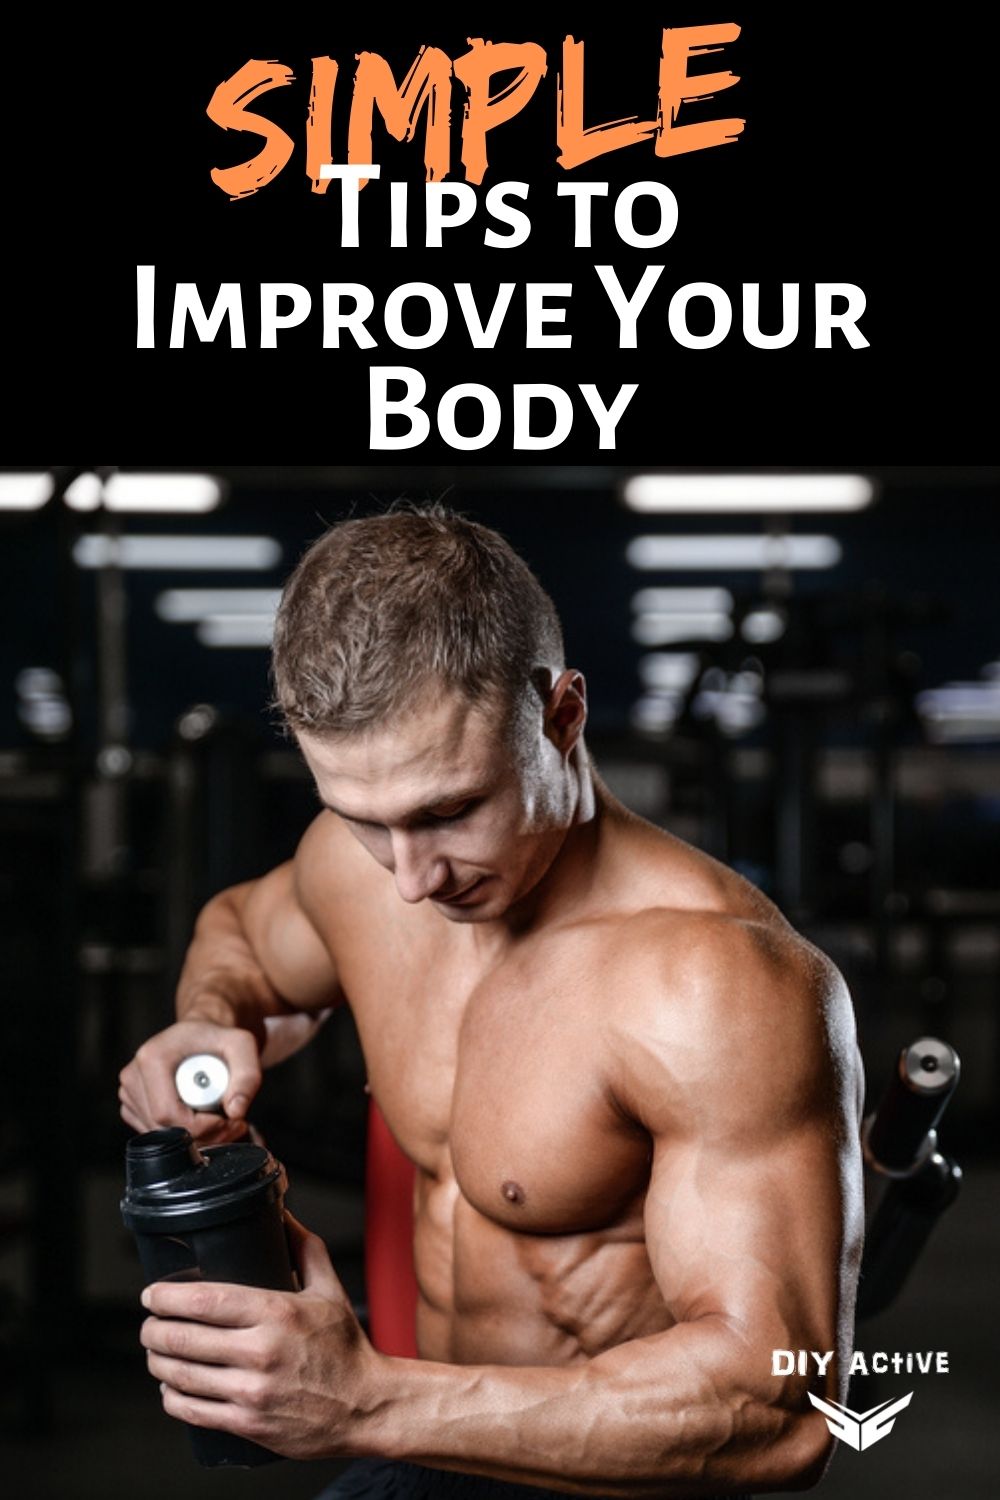 7 Simple Tips to Improve Your Body